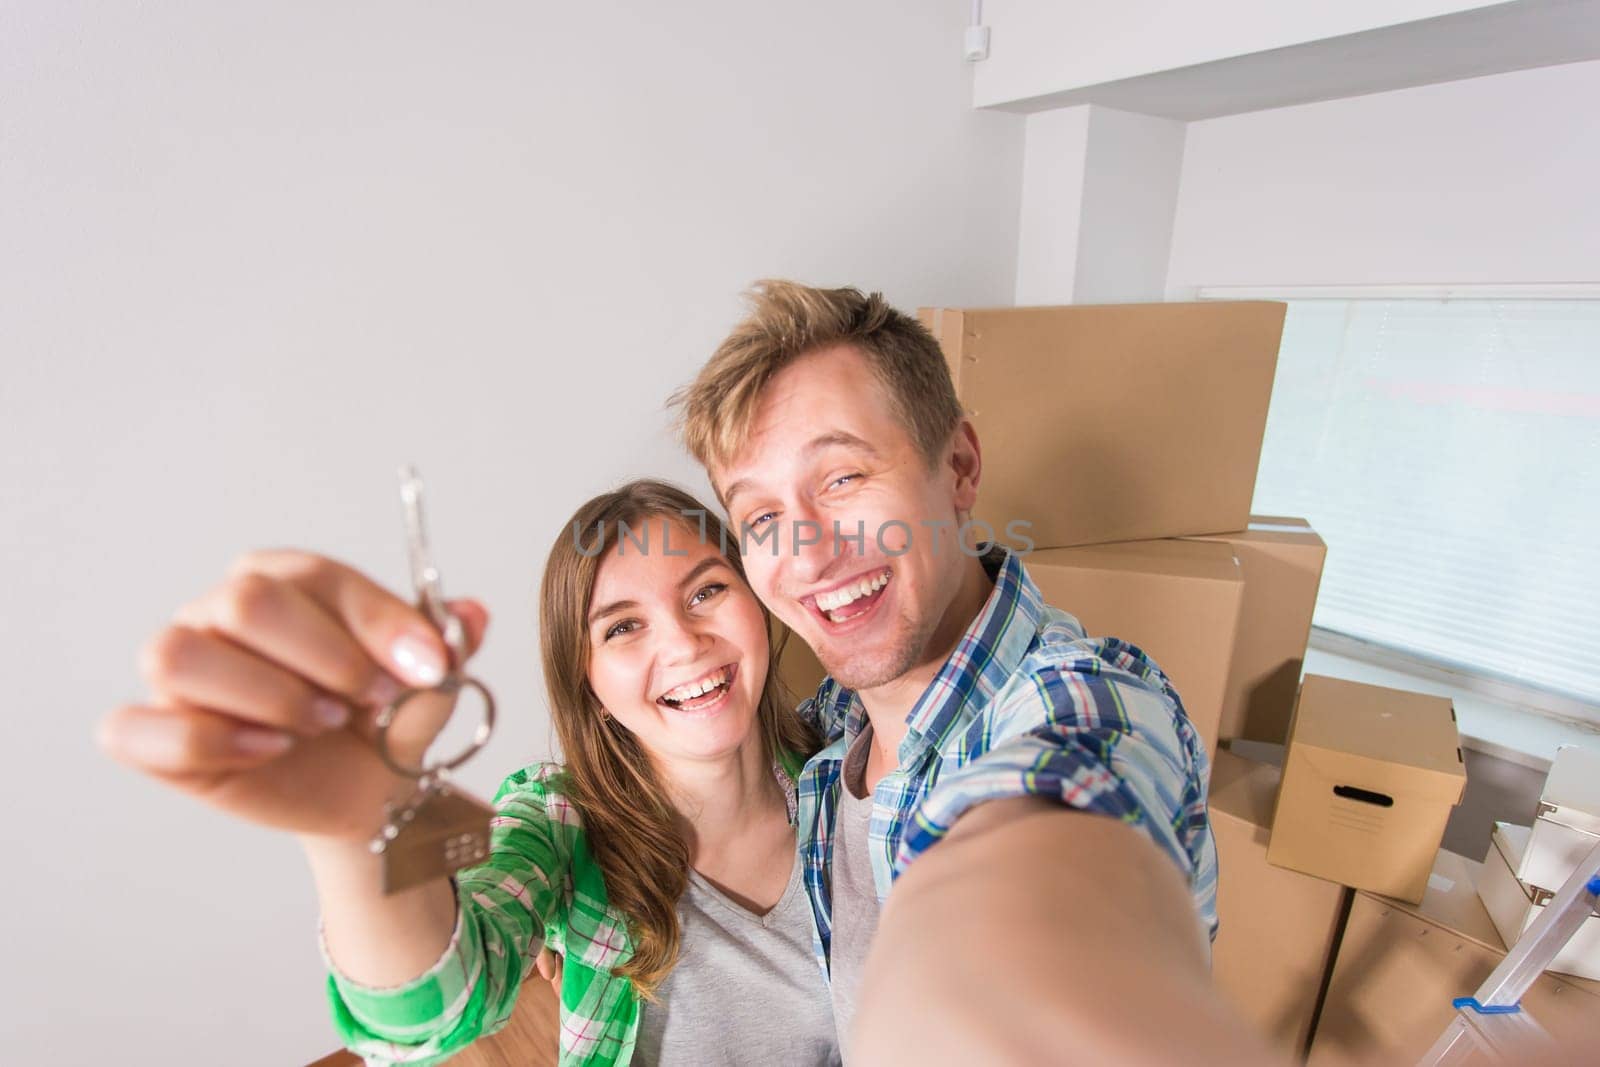 Happy funny couple embracing and showing house key in their new home by Satura86